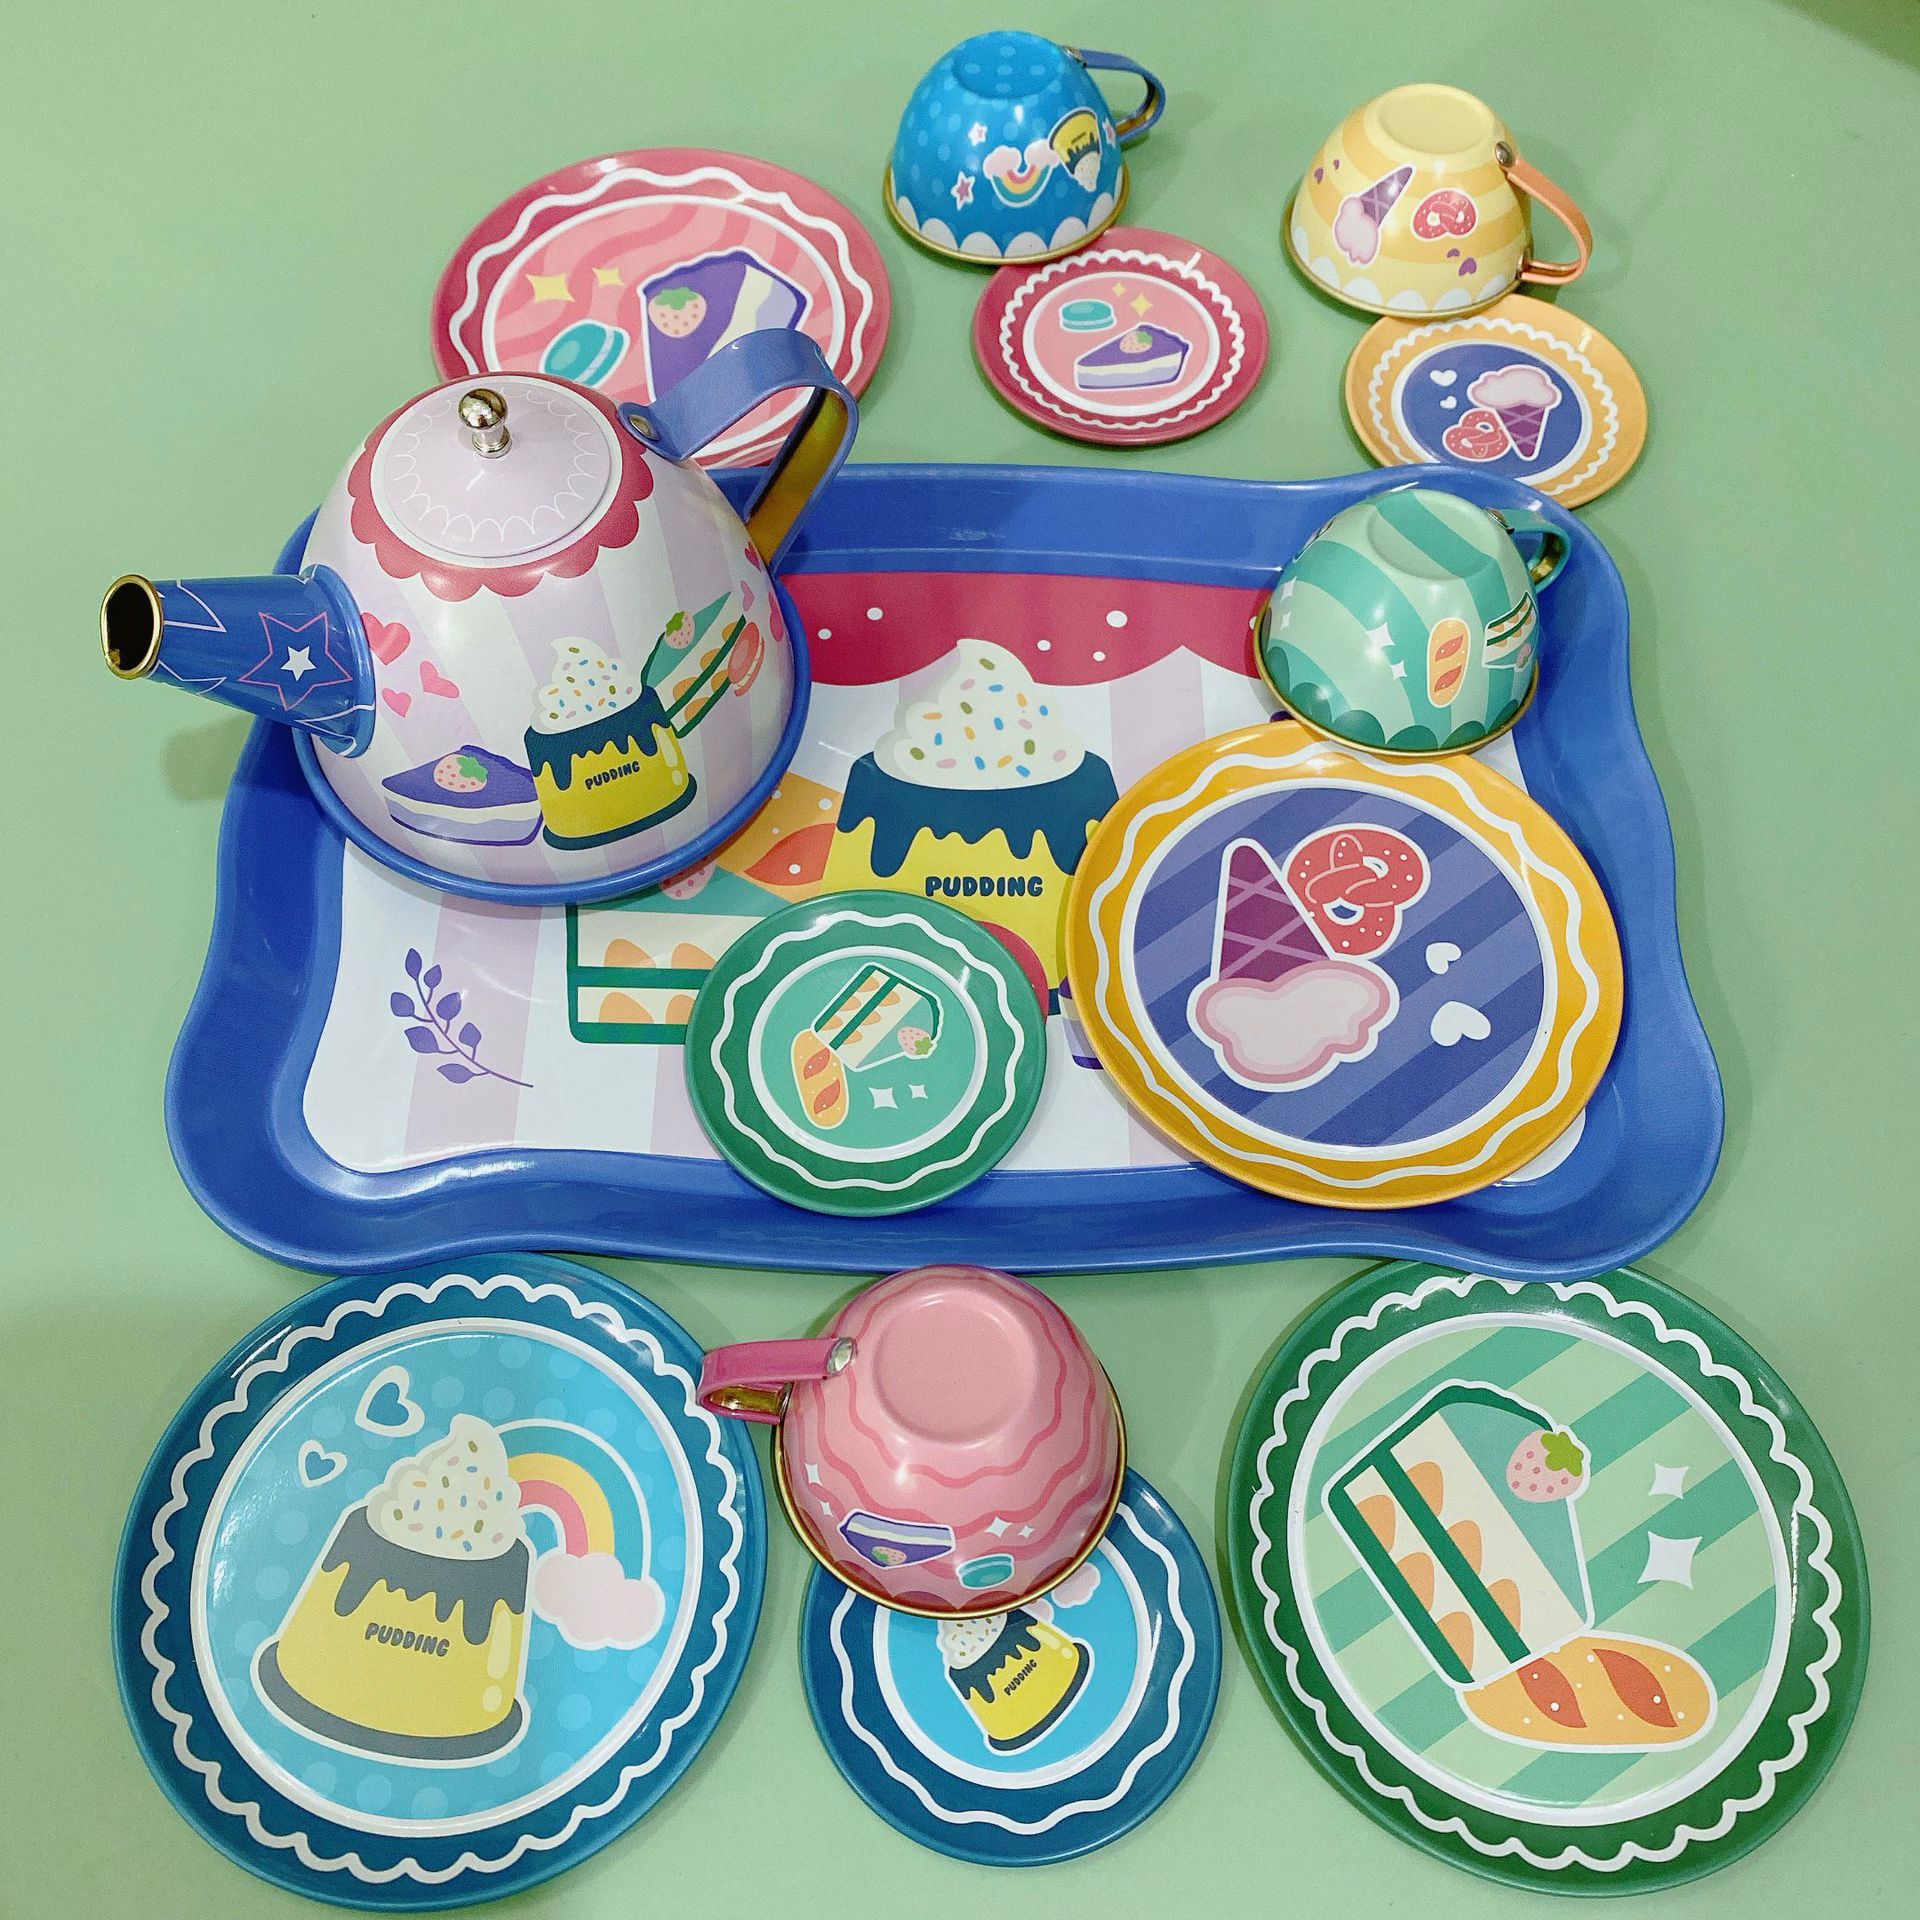 14pcs Tea Party Set For Little Girls Kitchen Utensils Tableware Metal Princess Tea Party Set Pretend Play Toys For Kids Gifts